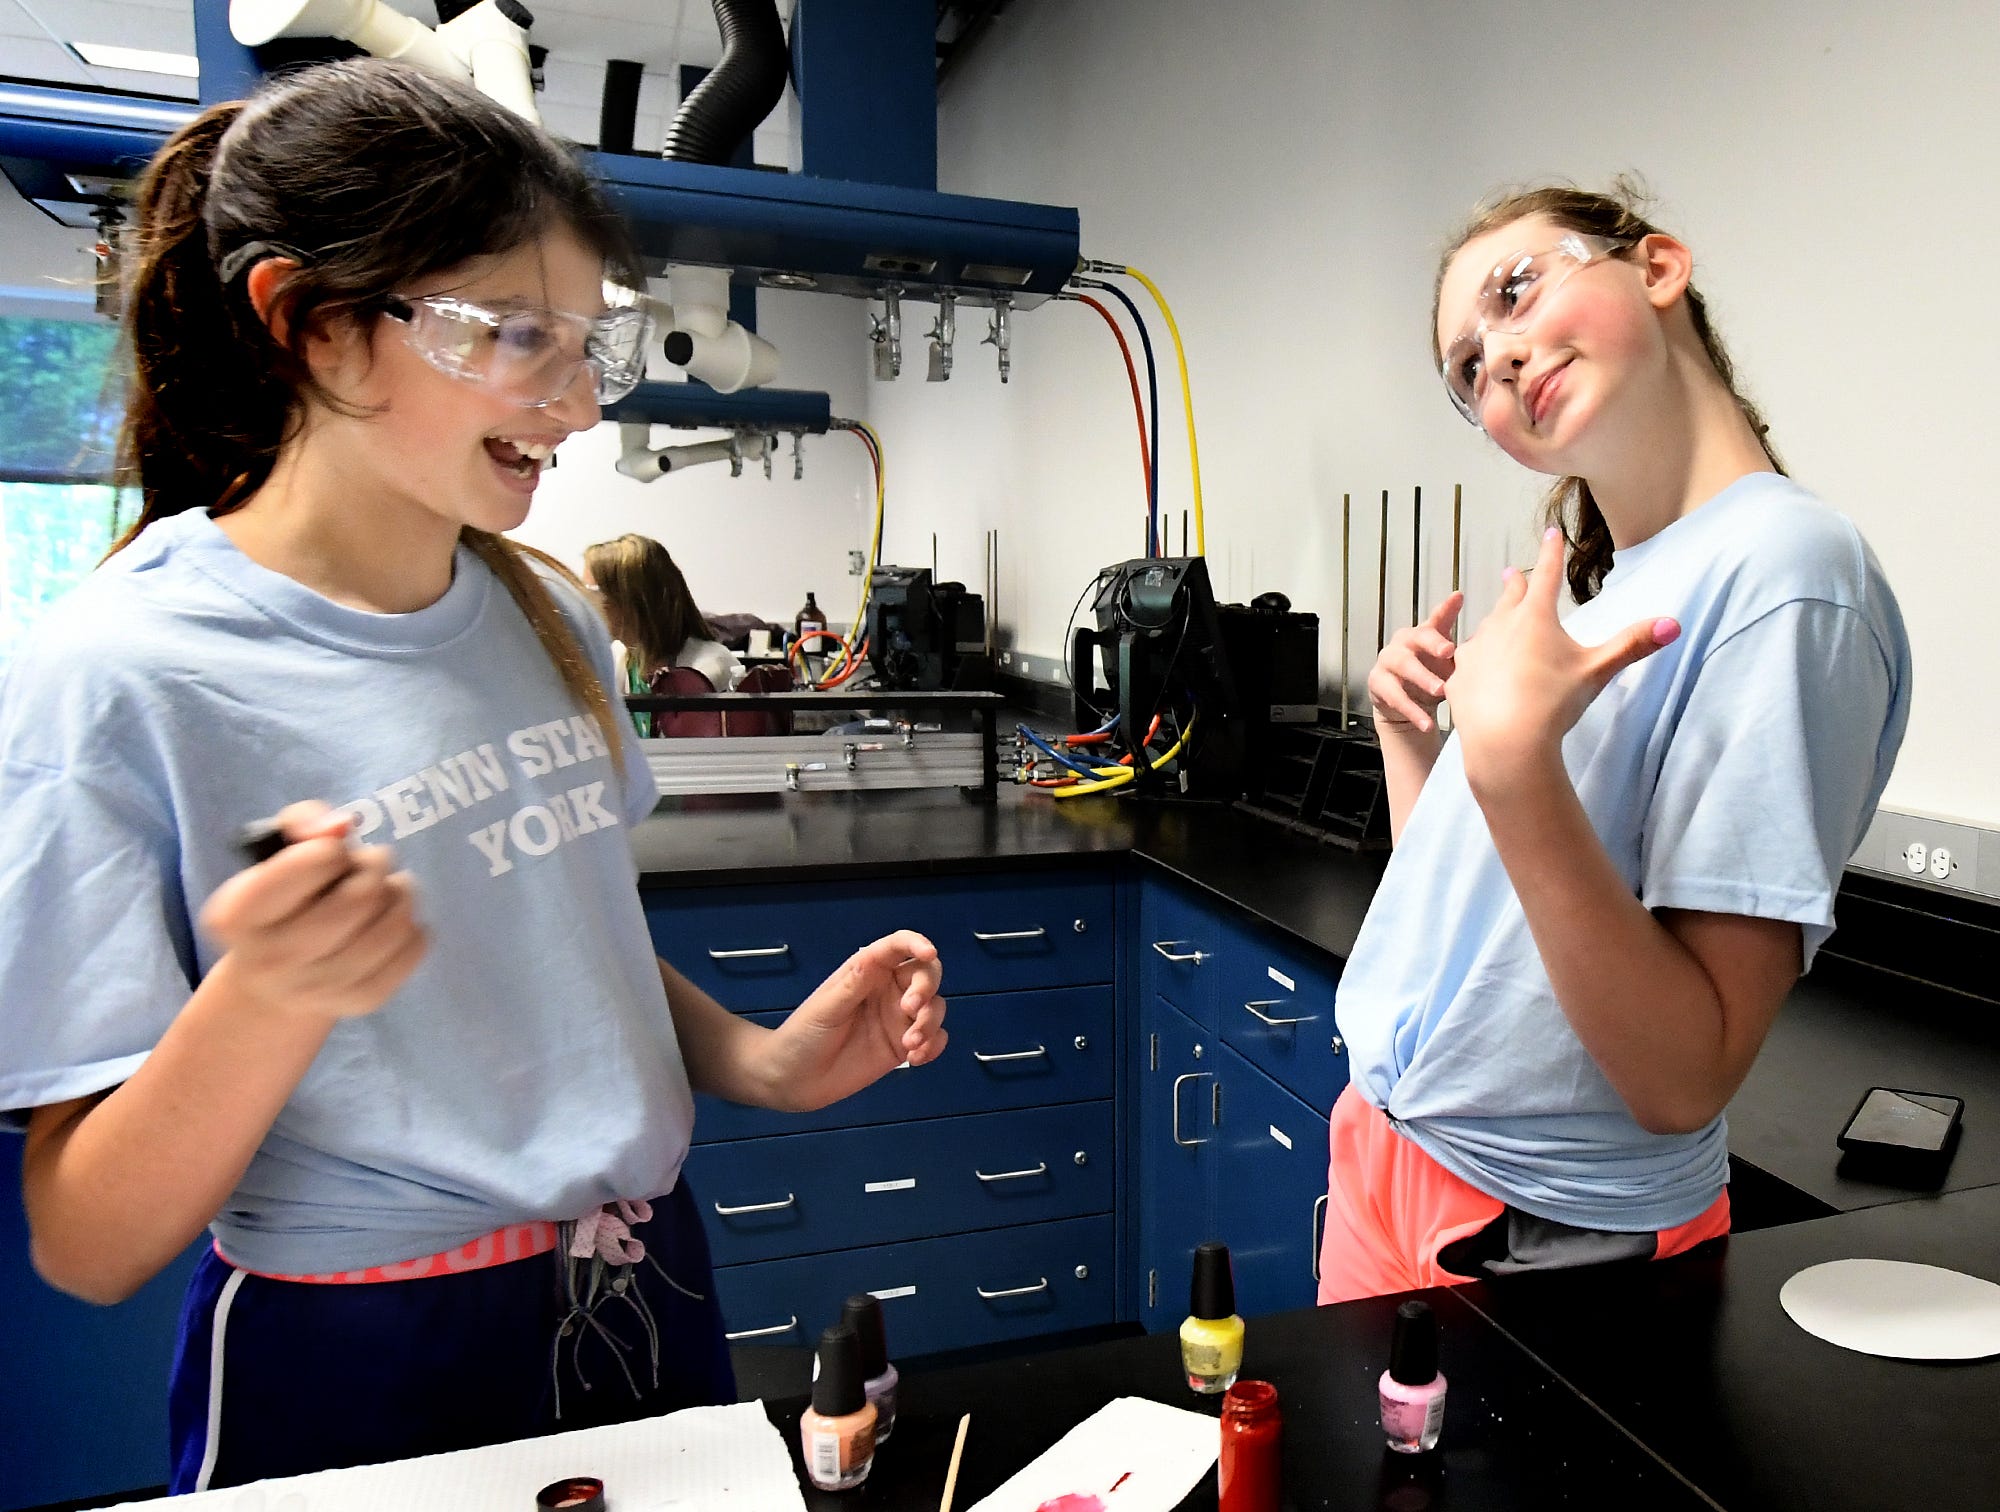 Dallastown Middle School student Elliot Post-Kulisiewicz shows off the nail polish she applied to classmate Emerson Dunker, left, during The Science of Color in Cosmetics workshop at the Pathways to Your Future: Exploring STEAM Careers event at Penn State York Friday, May 10, 2019. Over 200 seventh-grade girls from 28 area schools participated in the program which highlighted science, technology, engineering, art, and mathematics (STEAM) careers. Industry leaders administered the workshops during the program, which is in its 23rd year. Bill Kalina photo